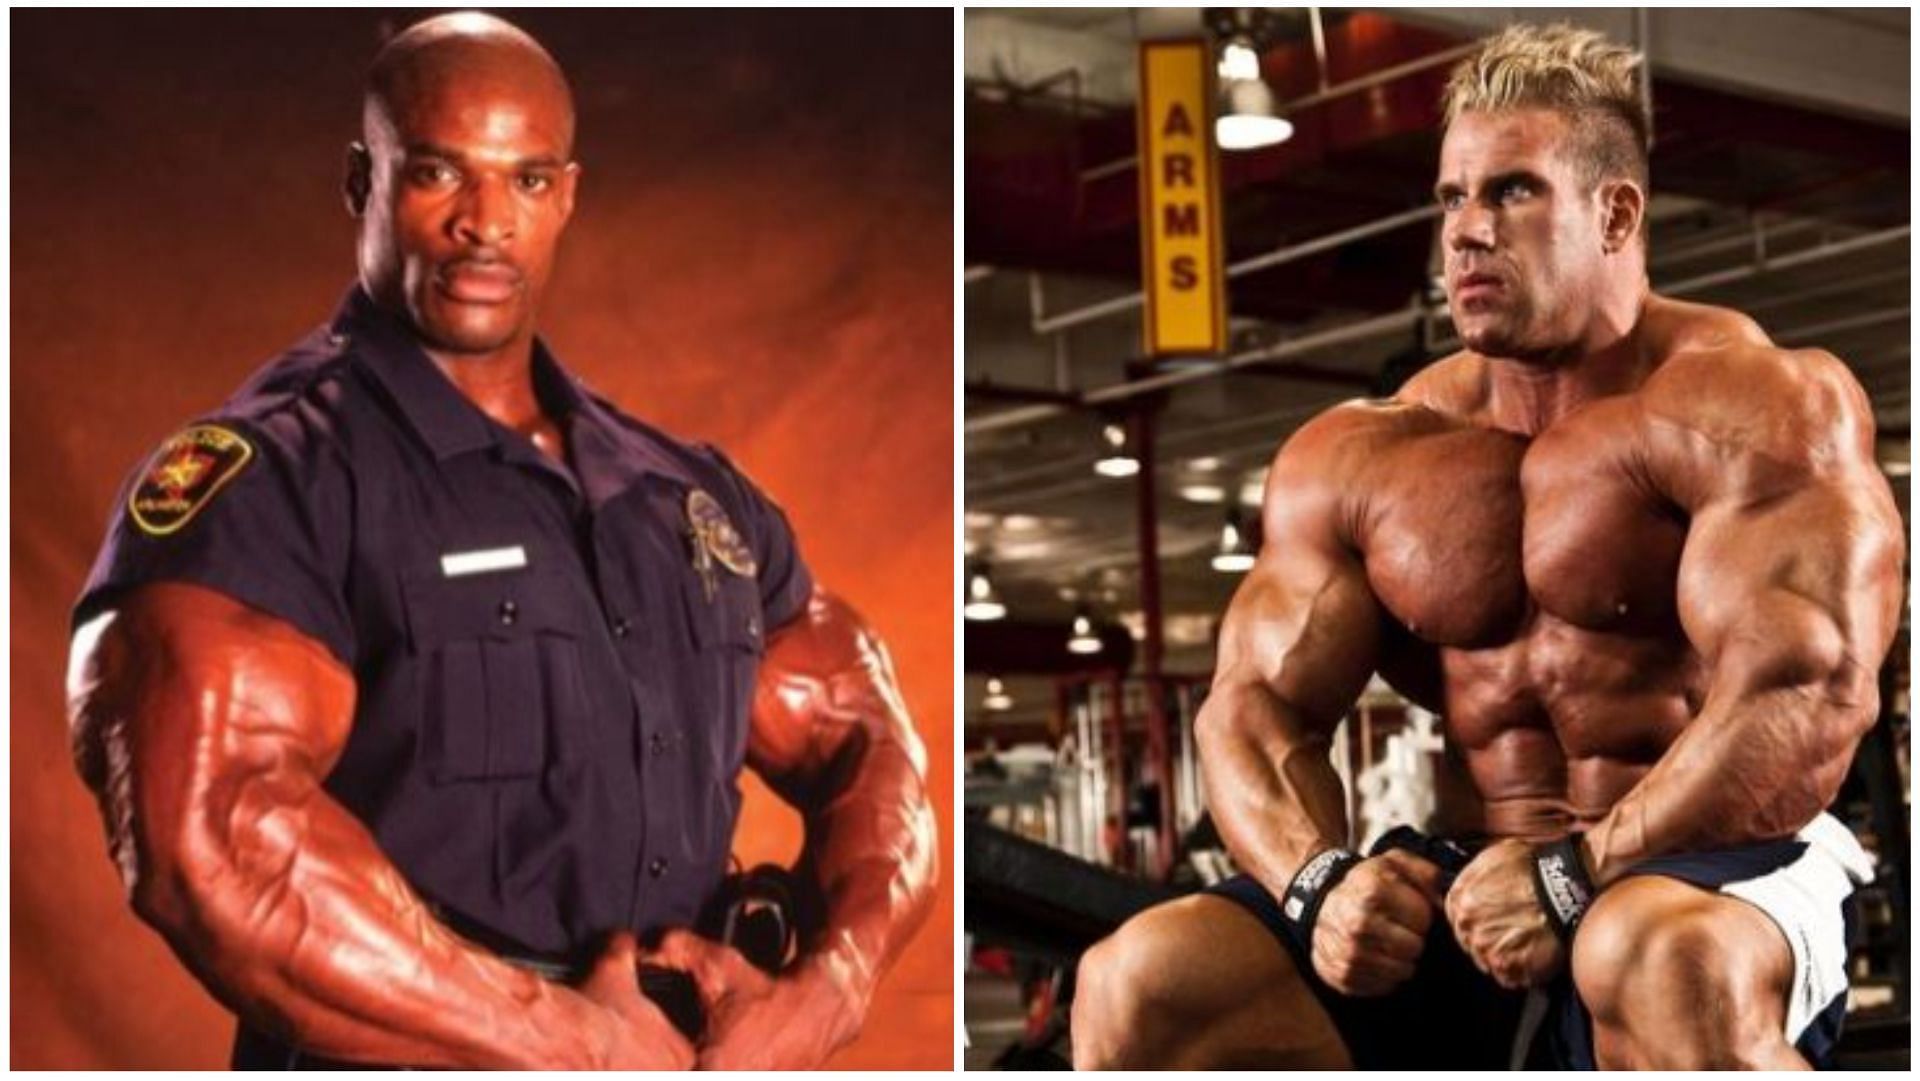 Everyone has their style” - Bodybuilding icons Ronnie Coleman and